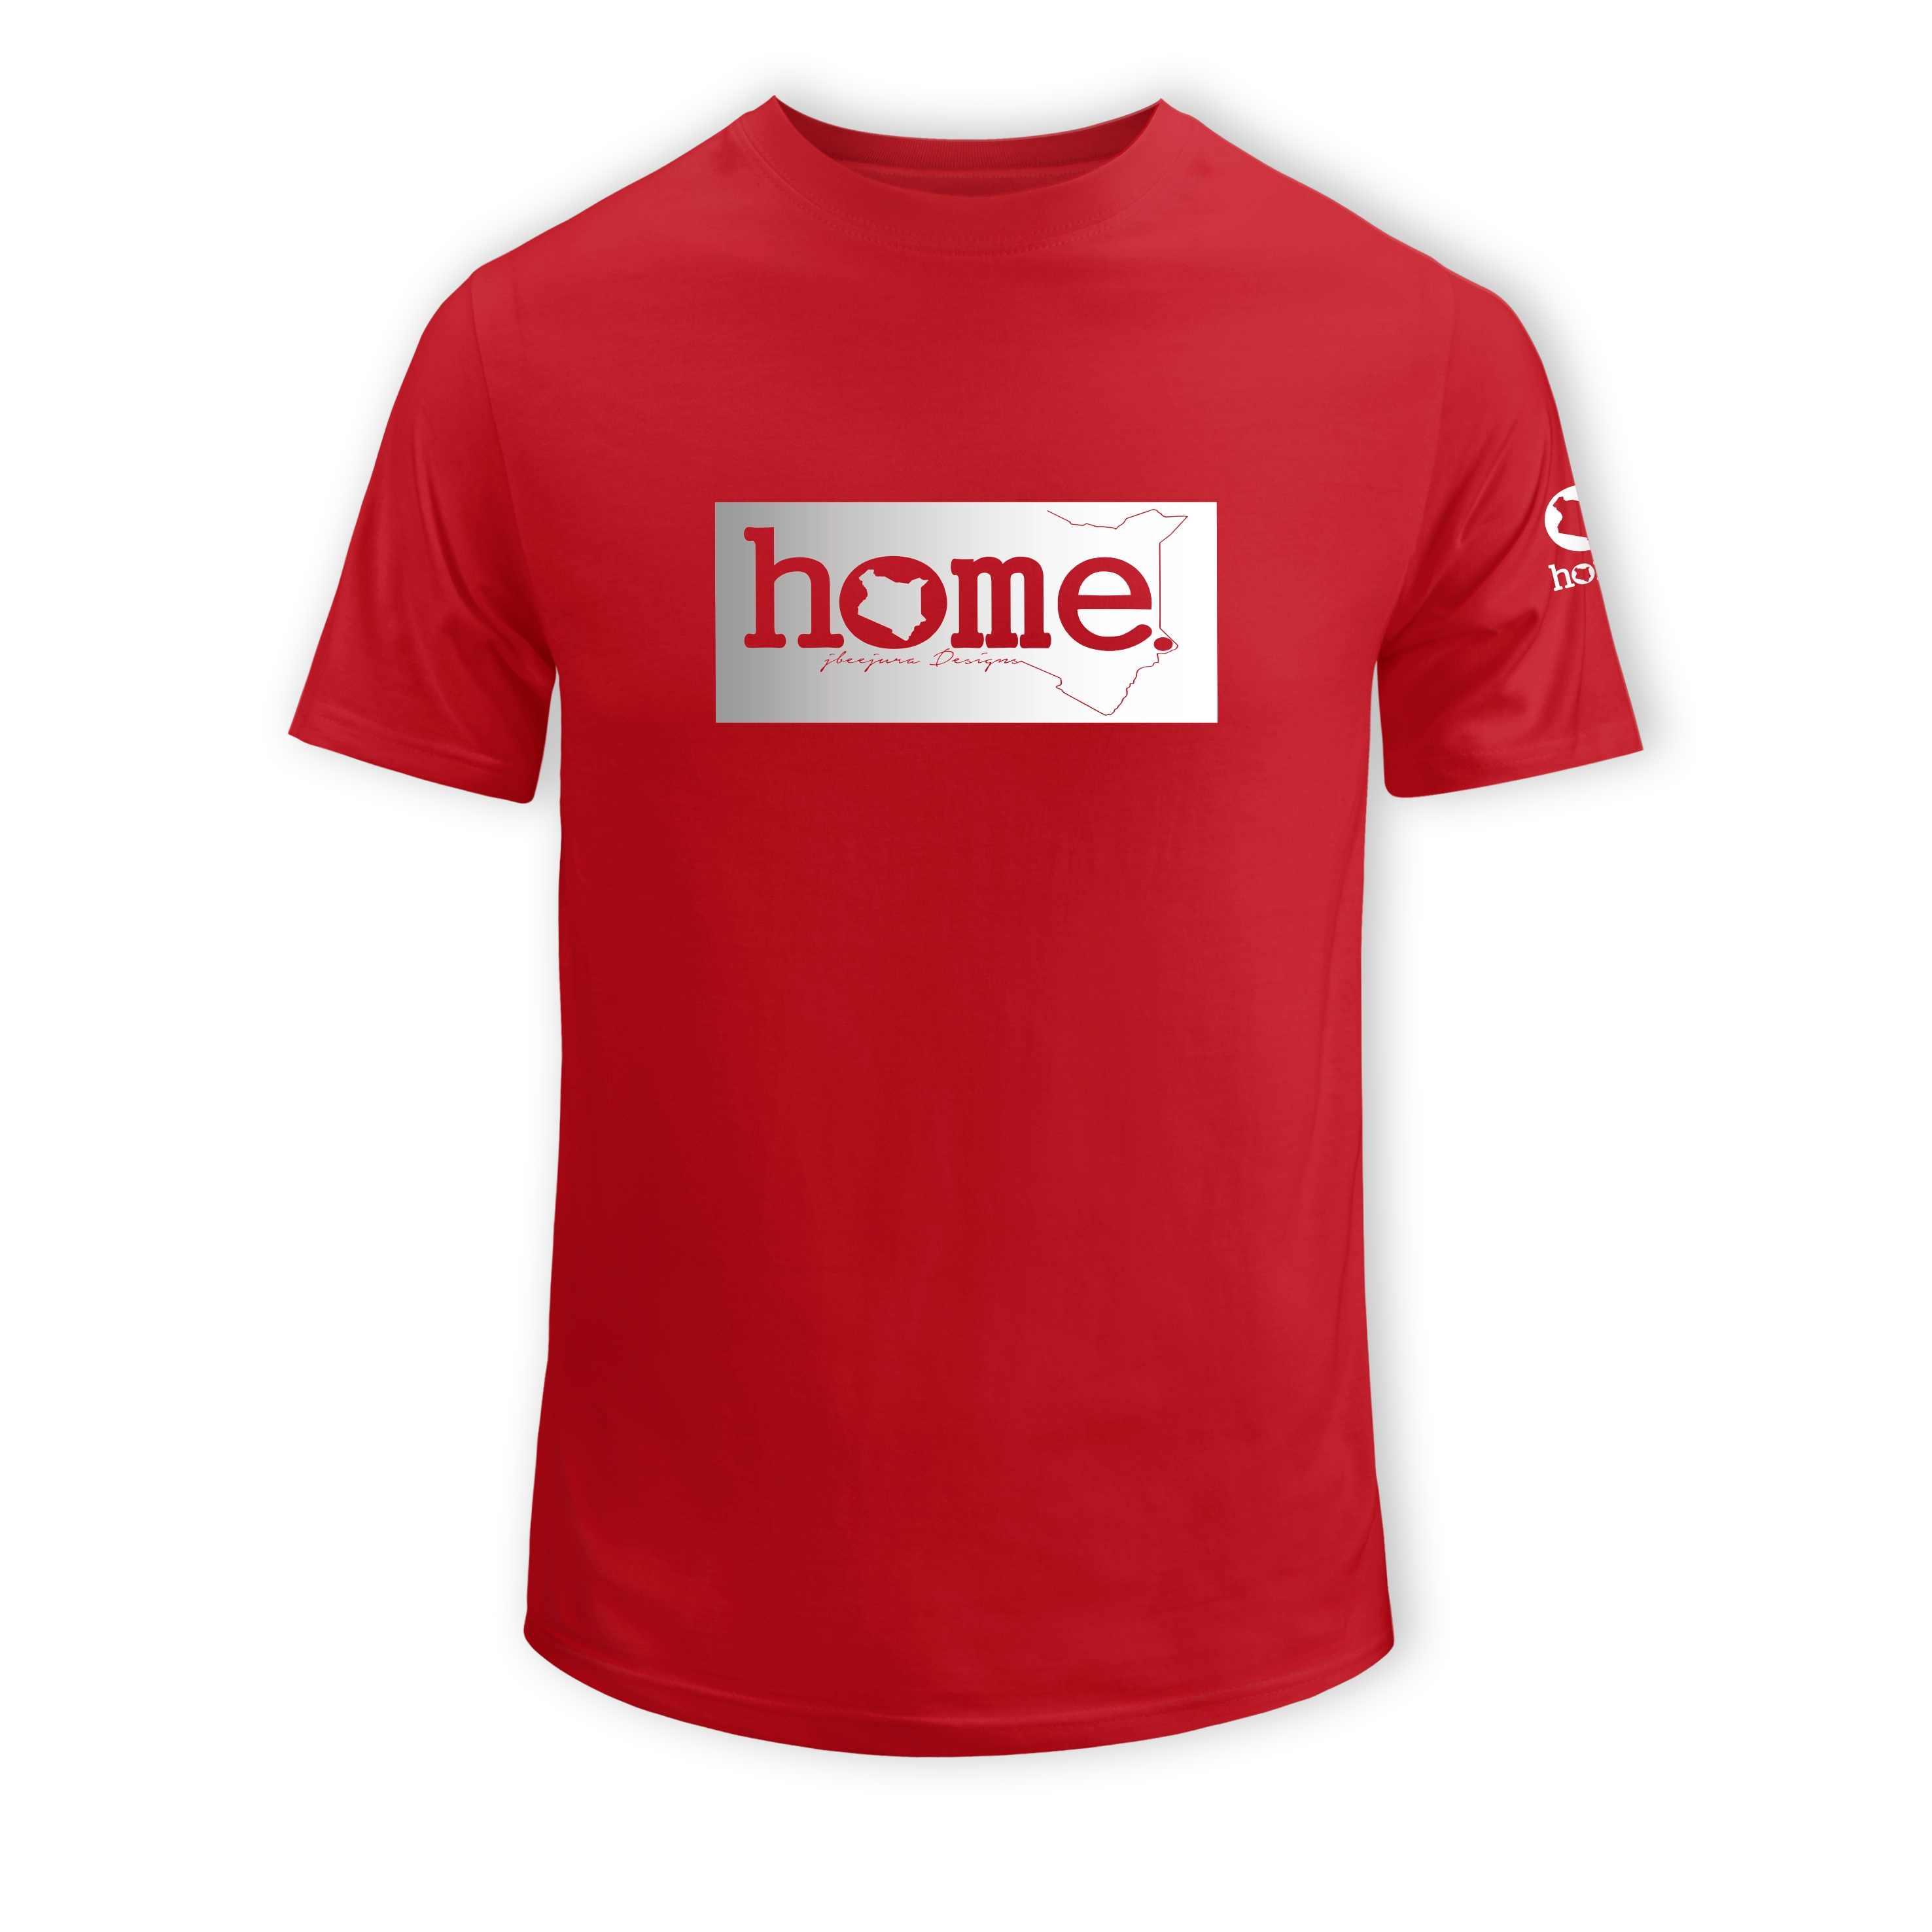 home_254 KIDS SHORT-SLEEVED RED T-SHIRT WITH A SILVER CLASSIC PRINT – COTTON PLUS FABRIC